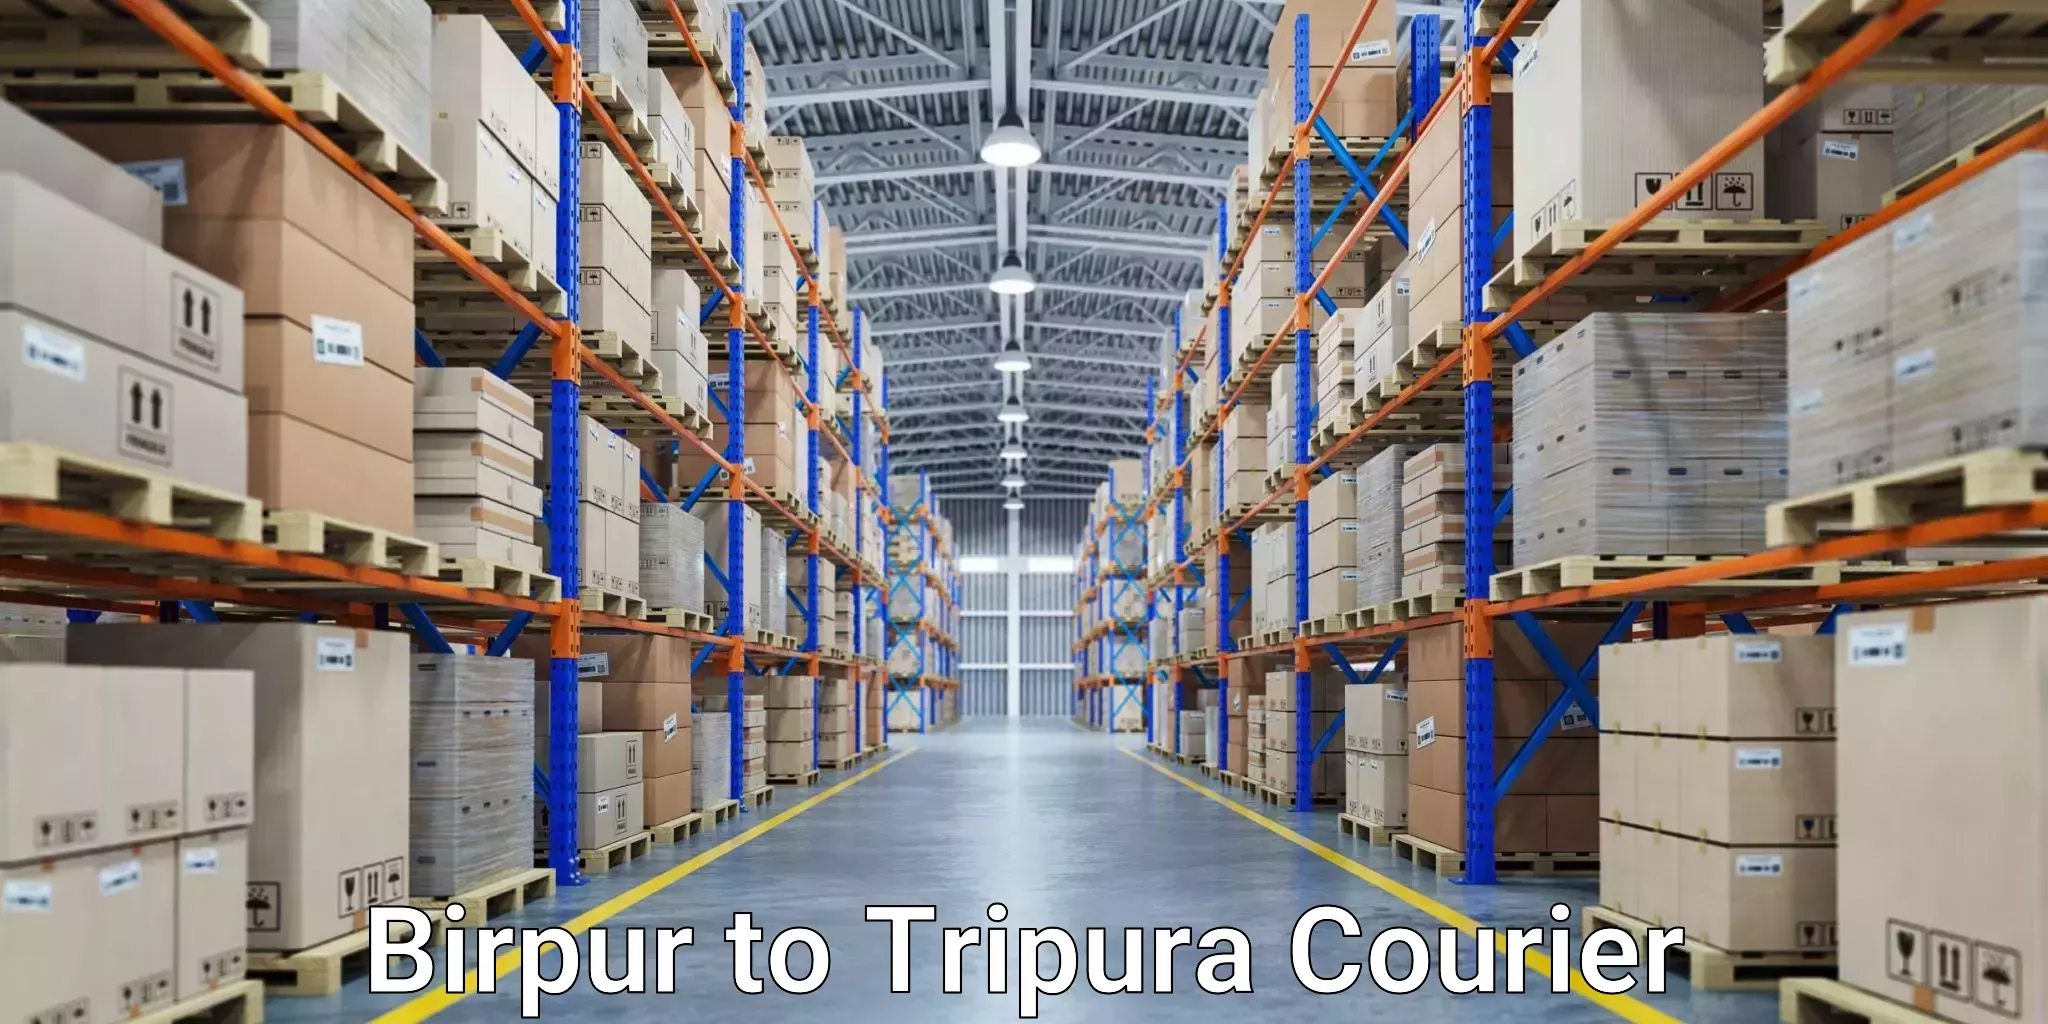 Expedited parcel delivery Birpur to Udaipur Tripura